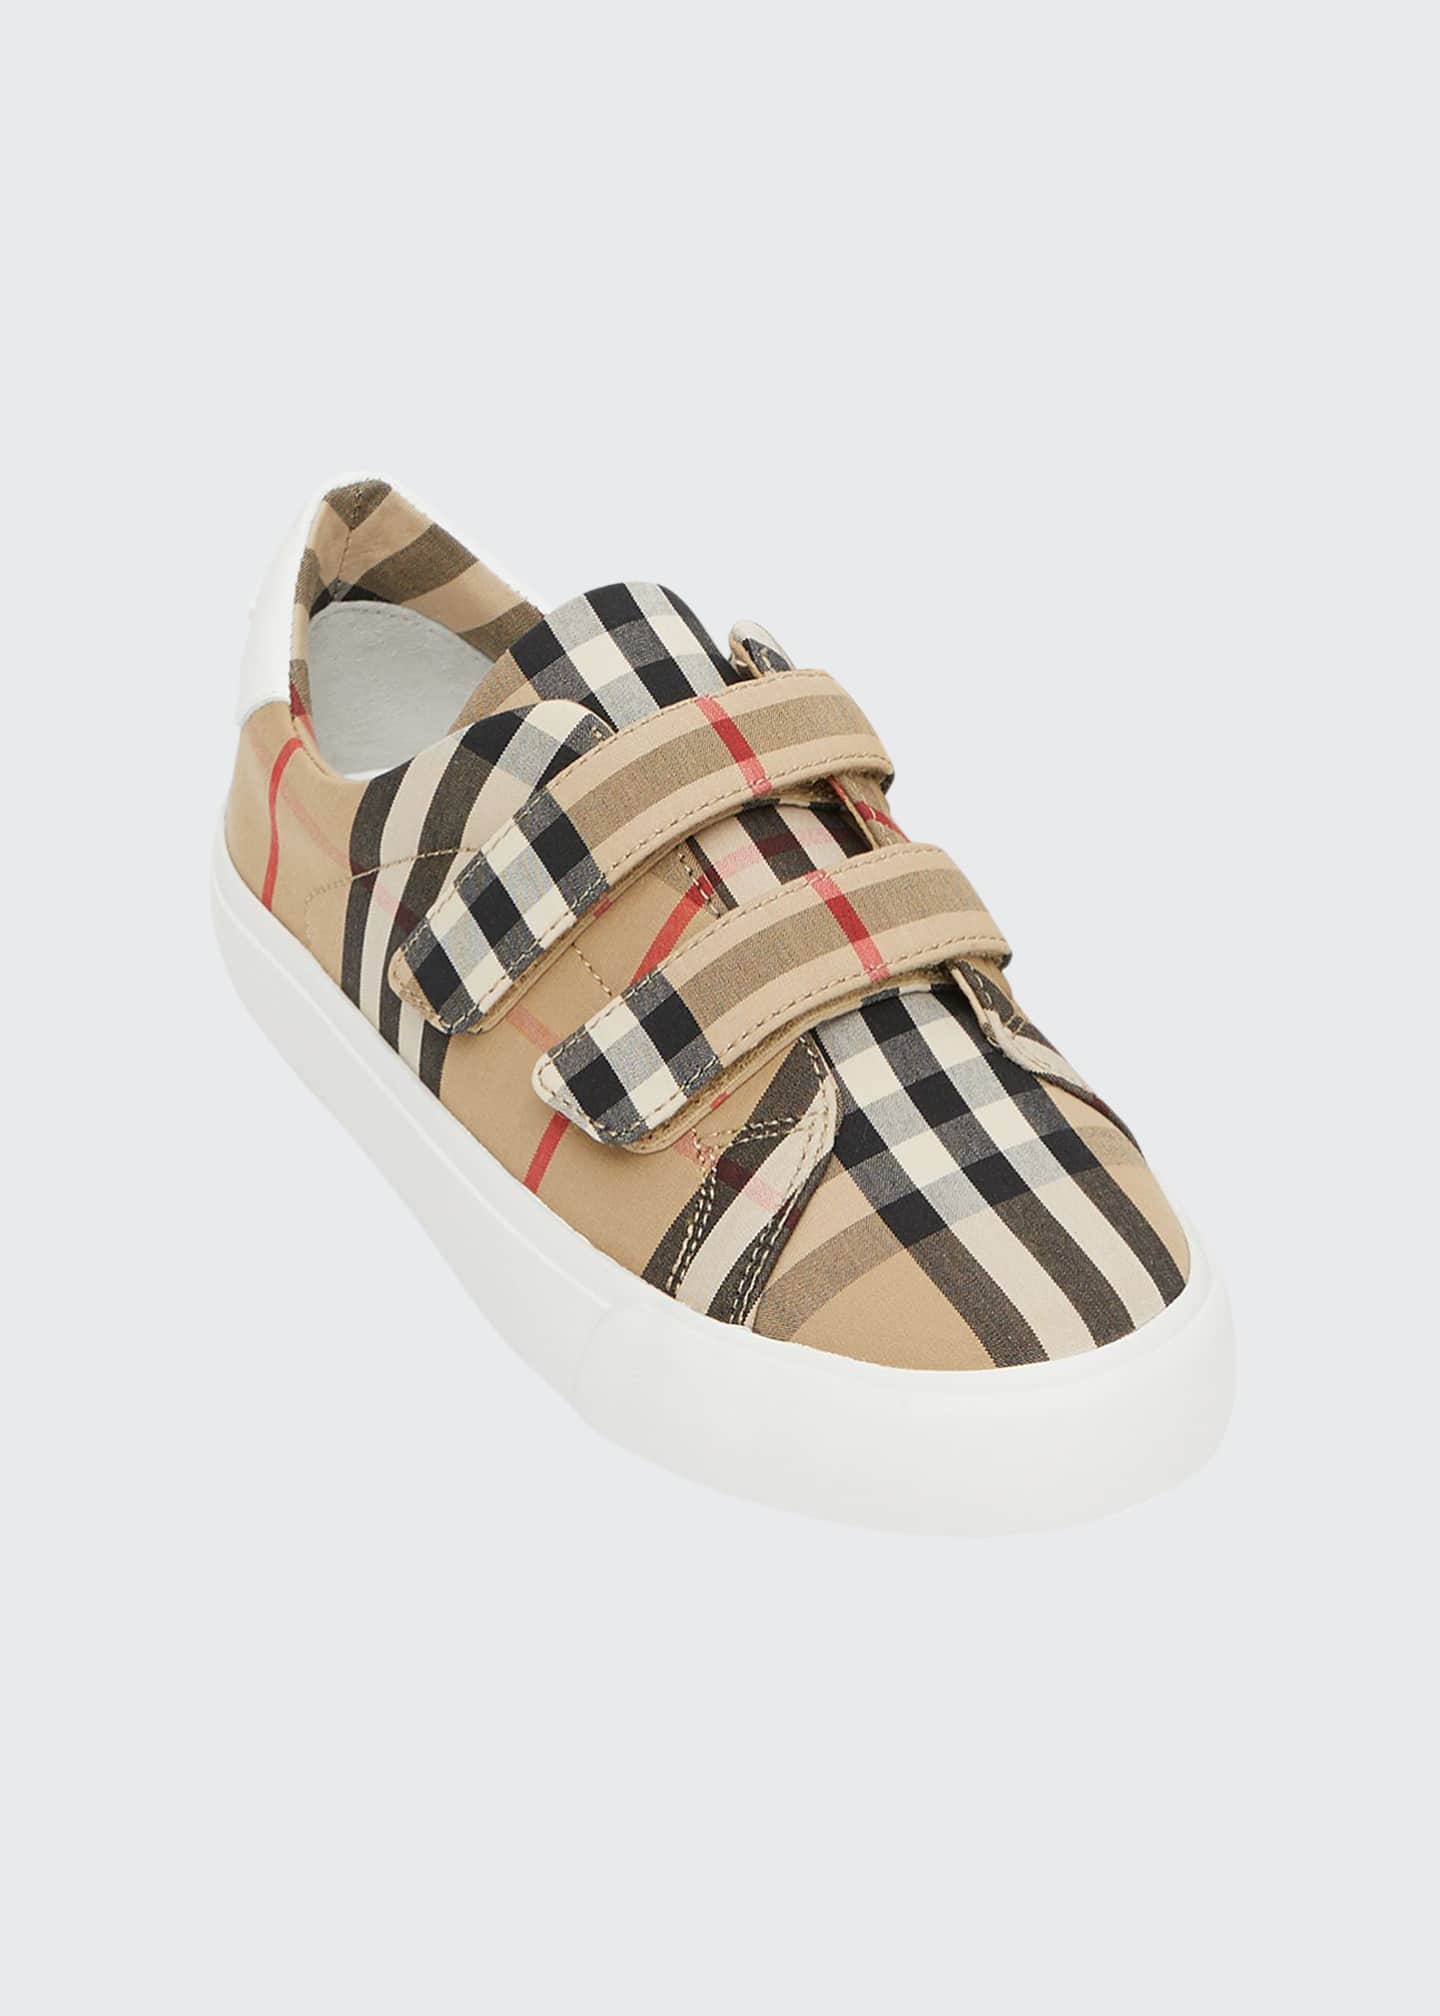 burberry strap sneakers